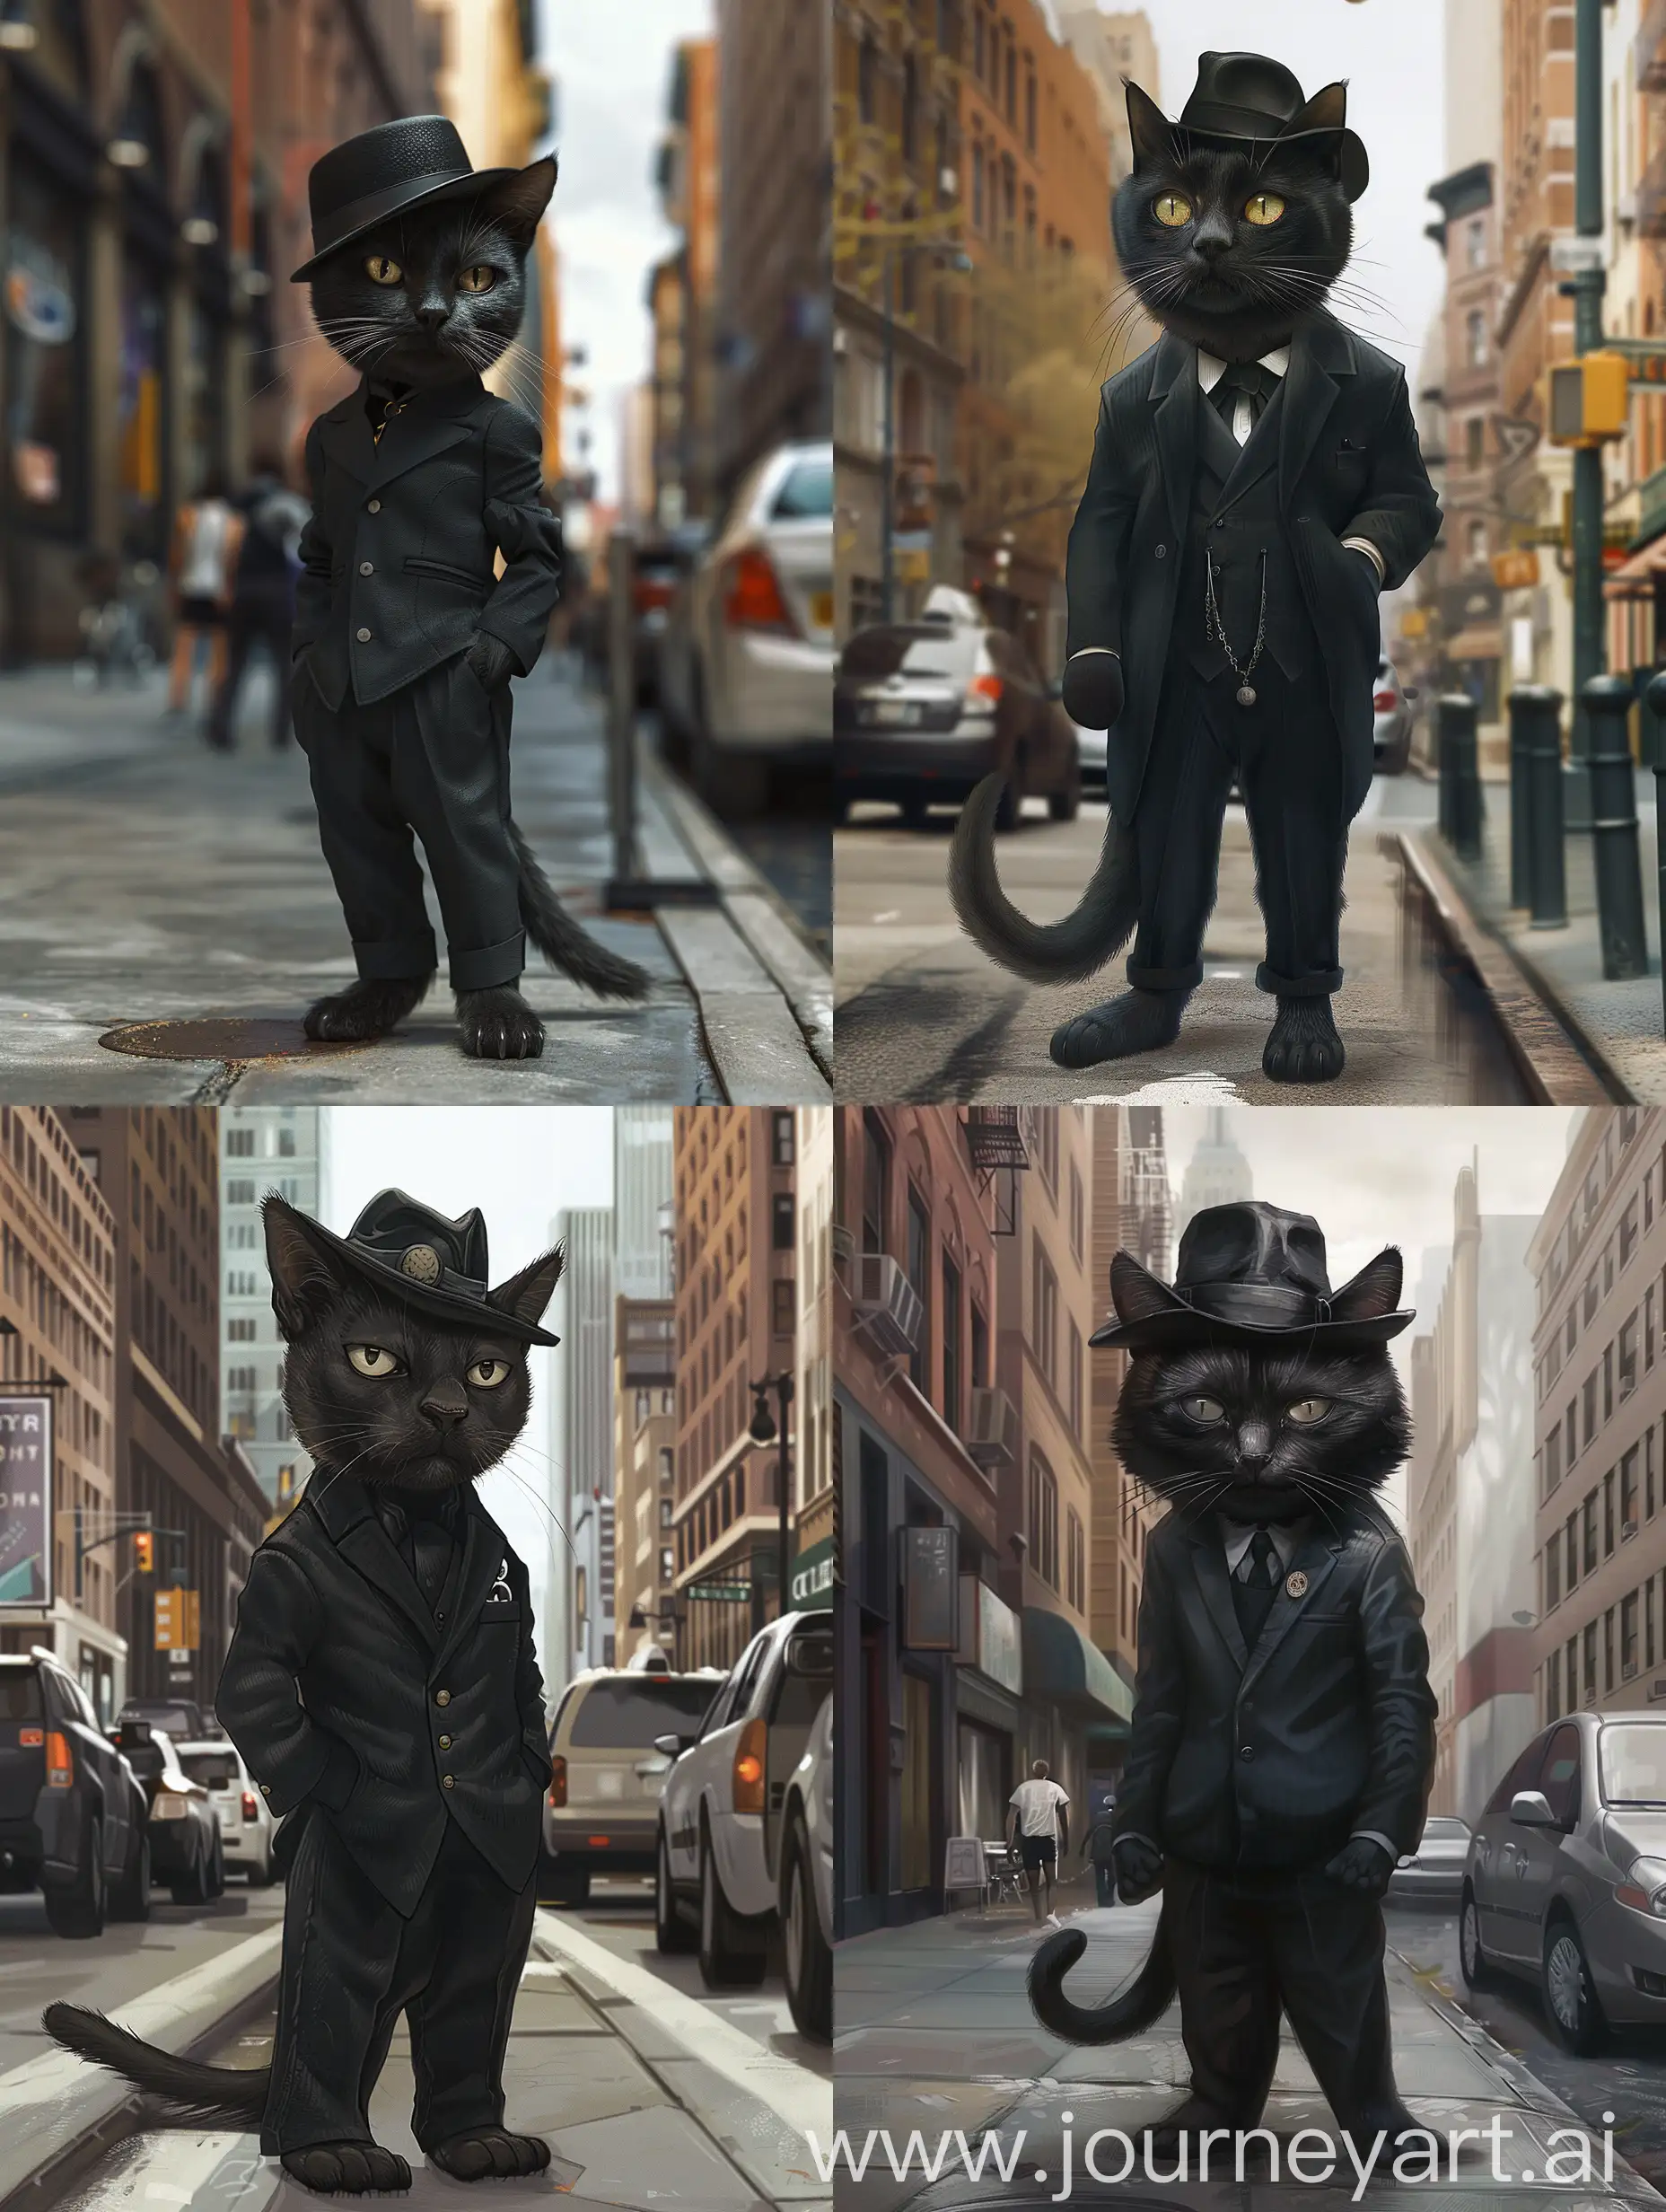 The black cat stands on the city street, dressed in a black suit and wearing a tilted small hat. Its eyes reveal a hint of melancholy, as if pondering something.